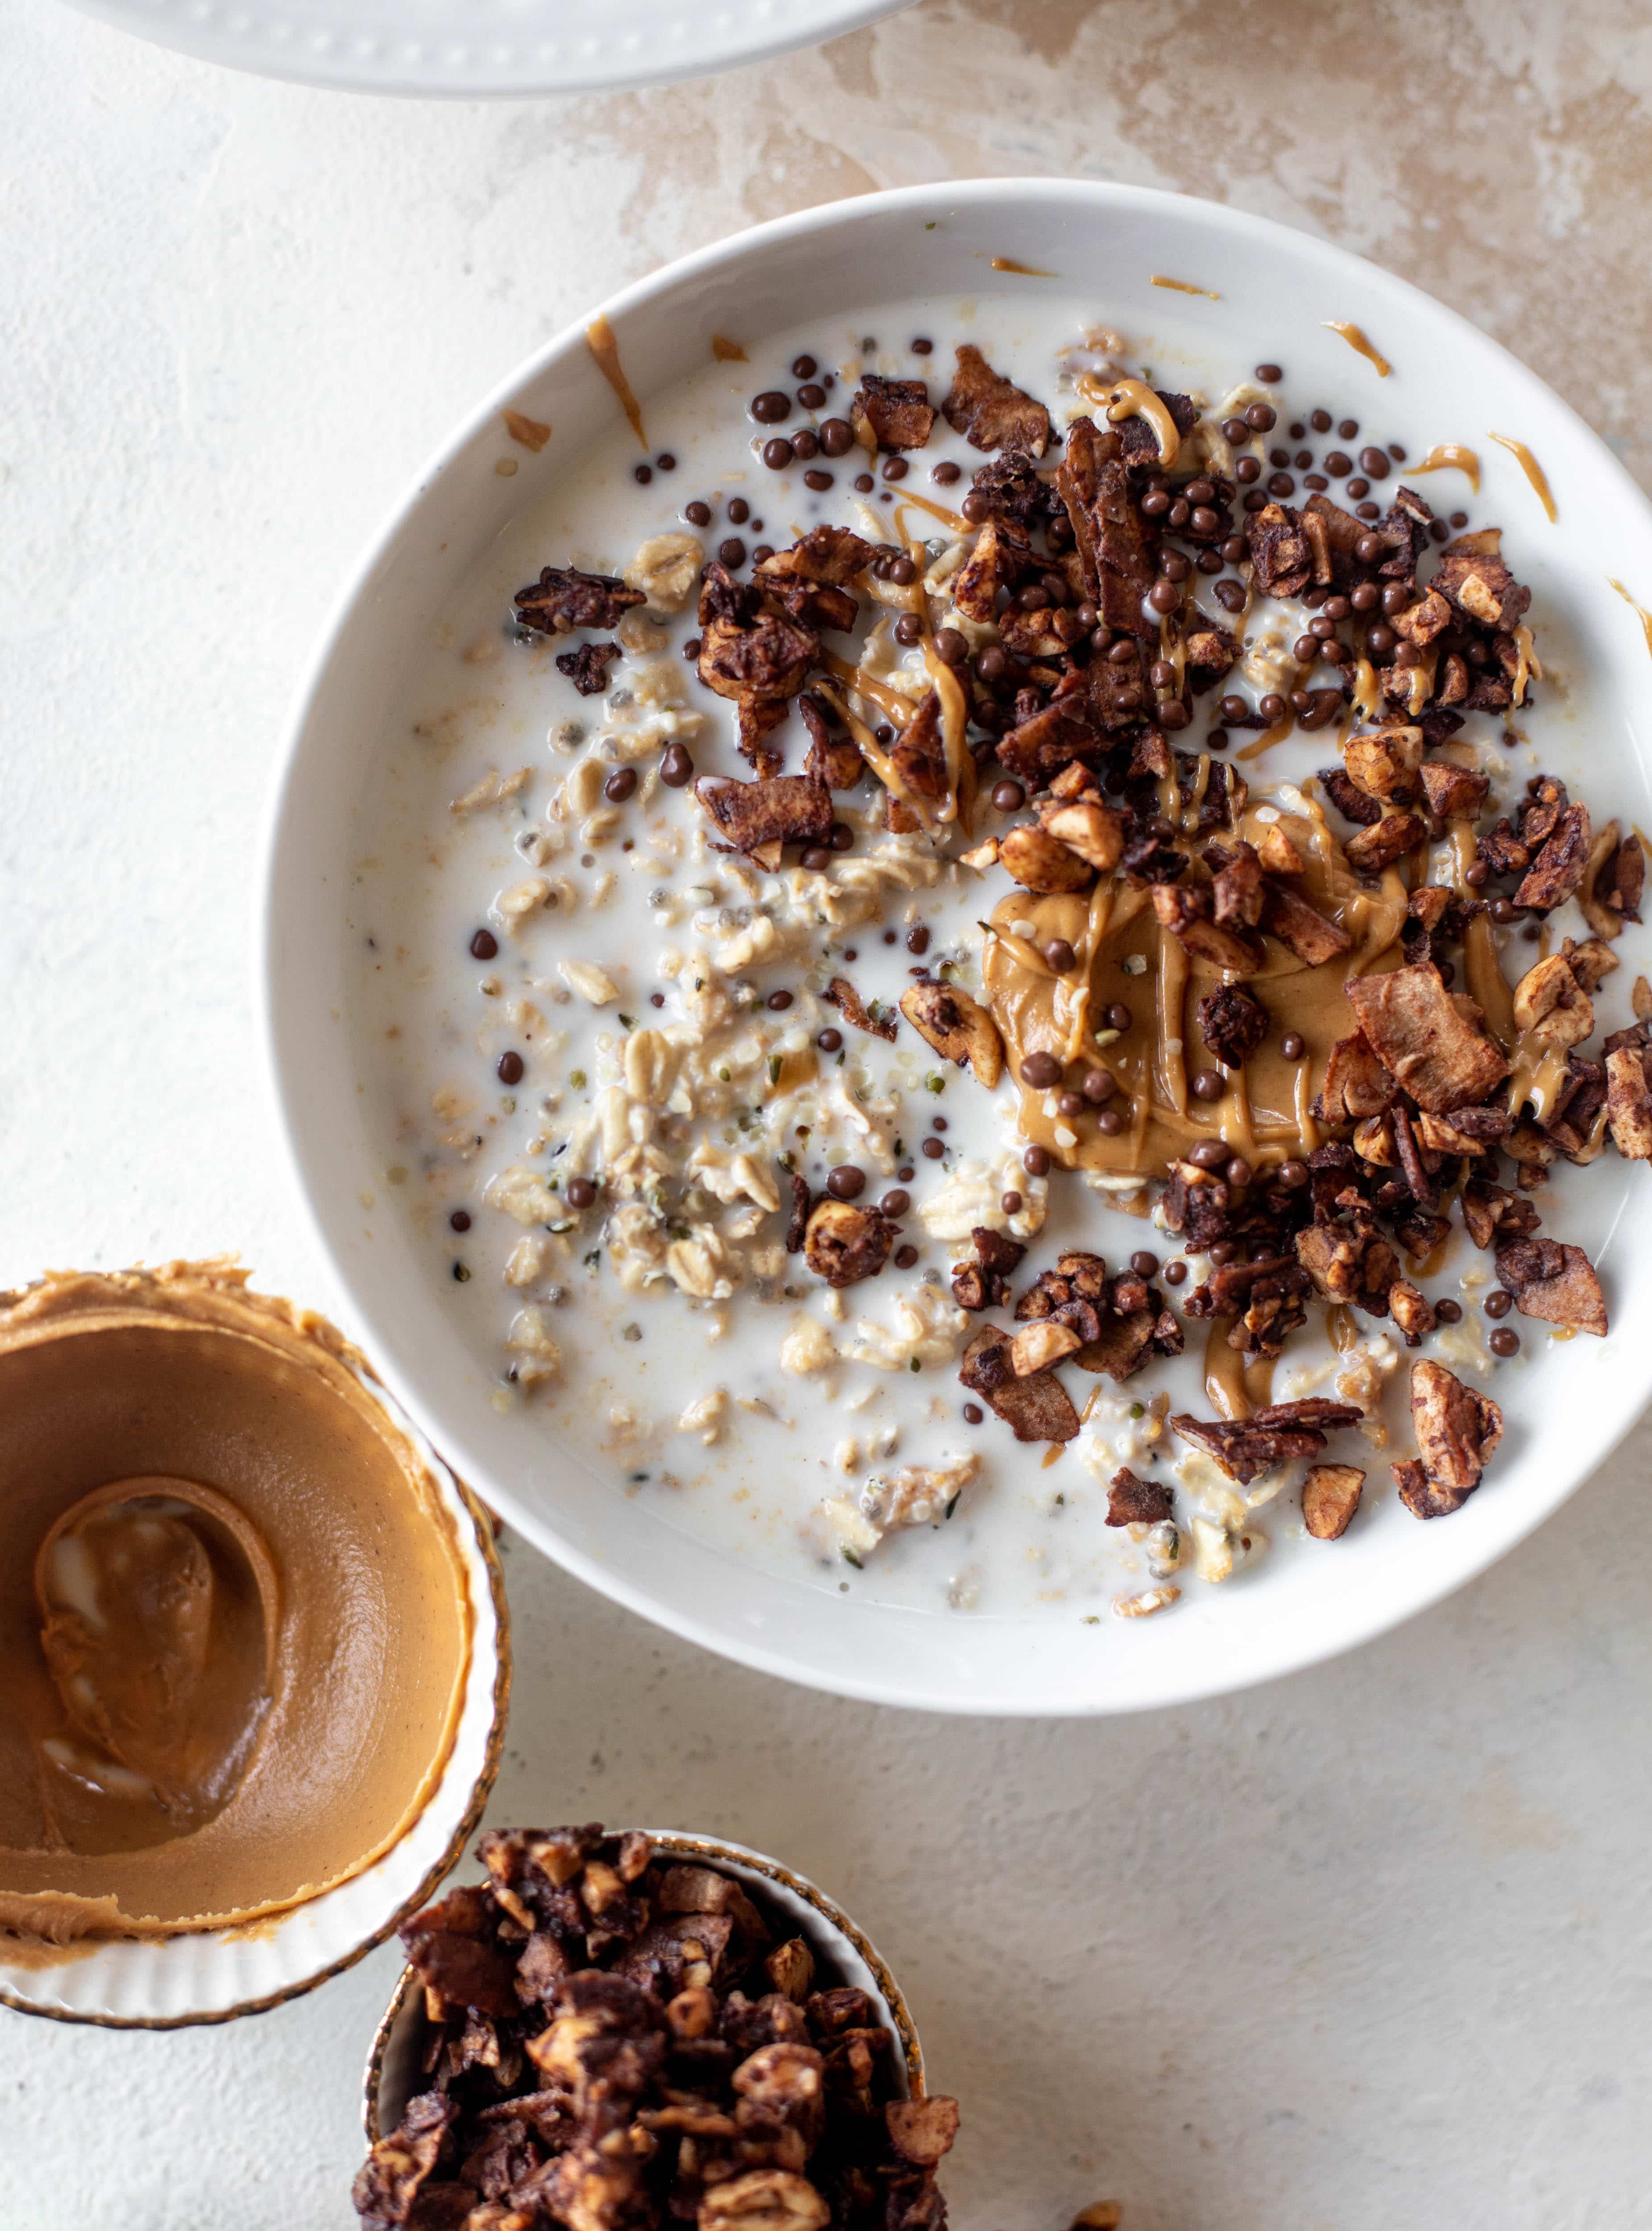 These peanut butter overnight oats are my favorite breakfast! Top with 5 minute grain free chocolate granola and it's the best combo ever.